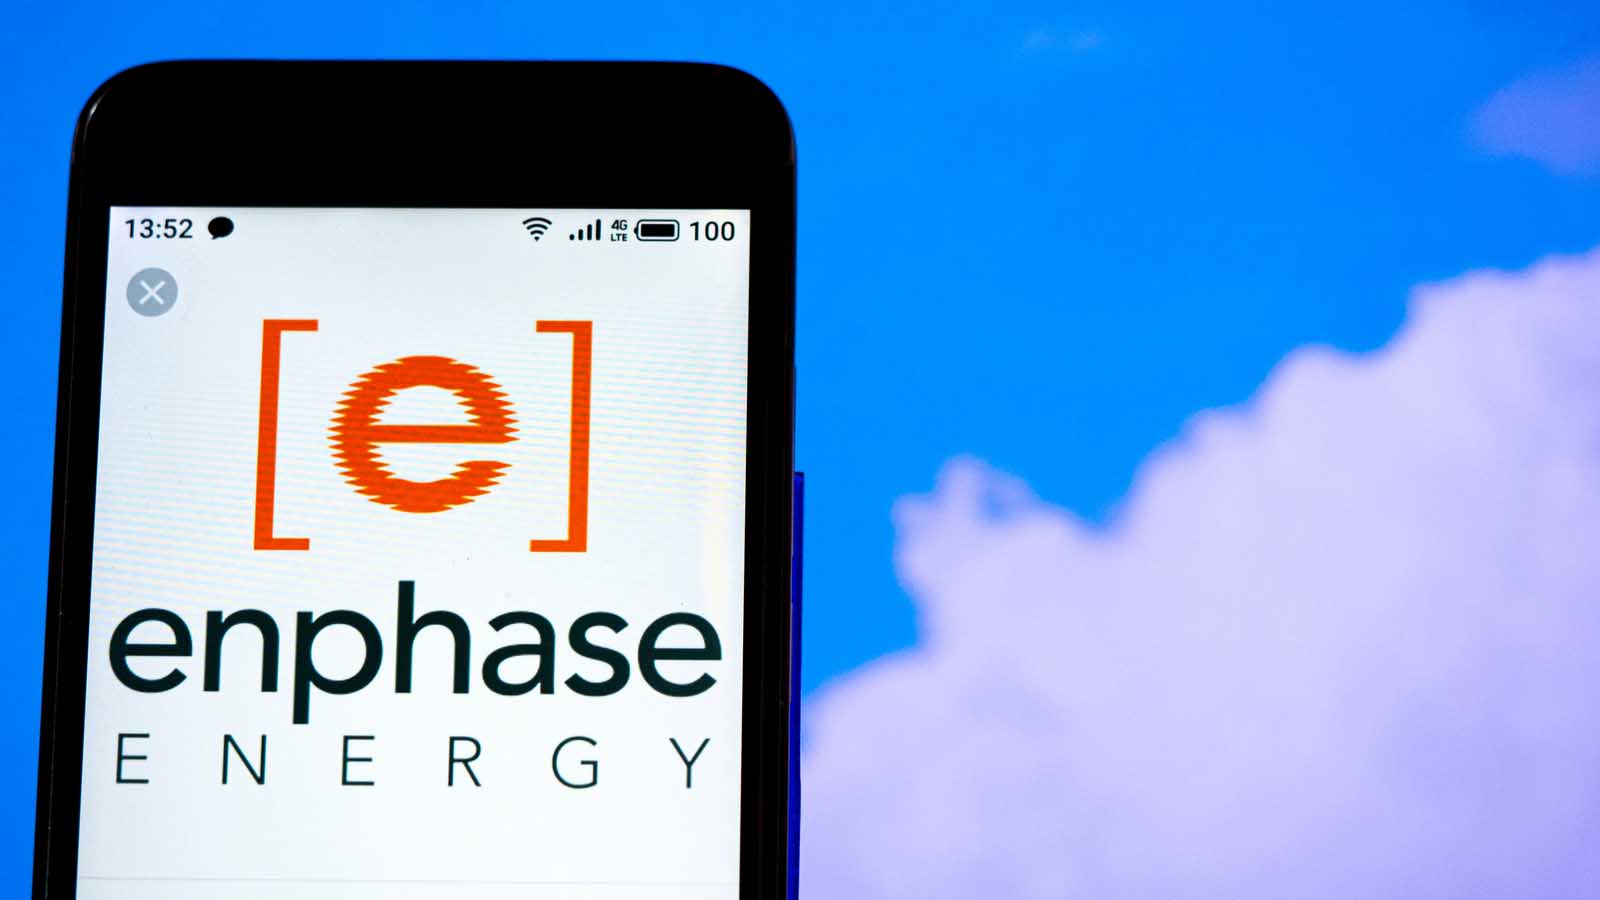 mobile phone screen with enphase energy logo on it to represent renewable energy stocks